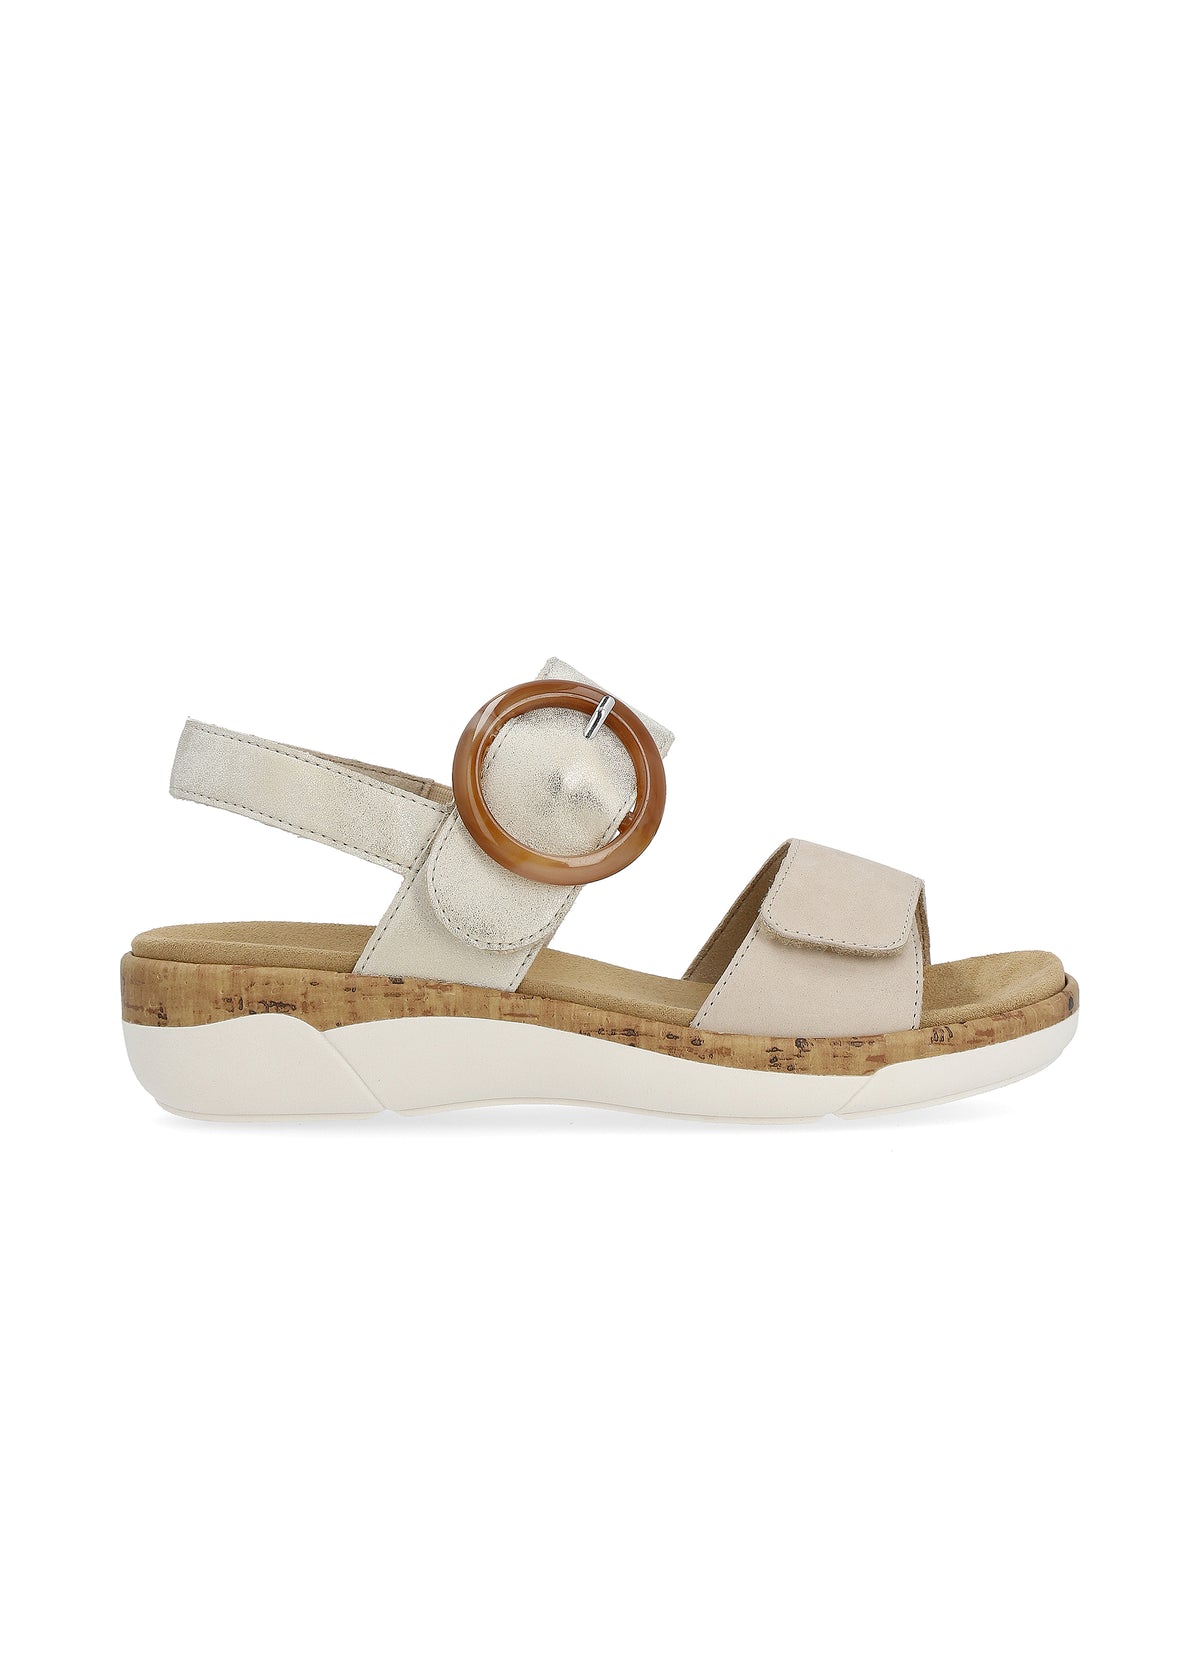 Sandals with a small wedge heel - beige, Velcro fastening